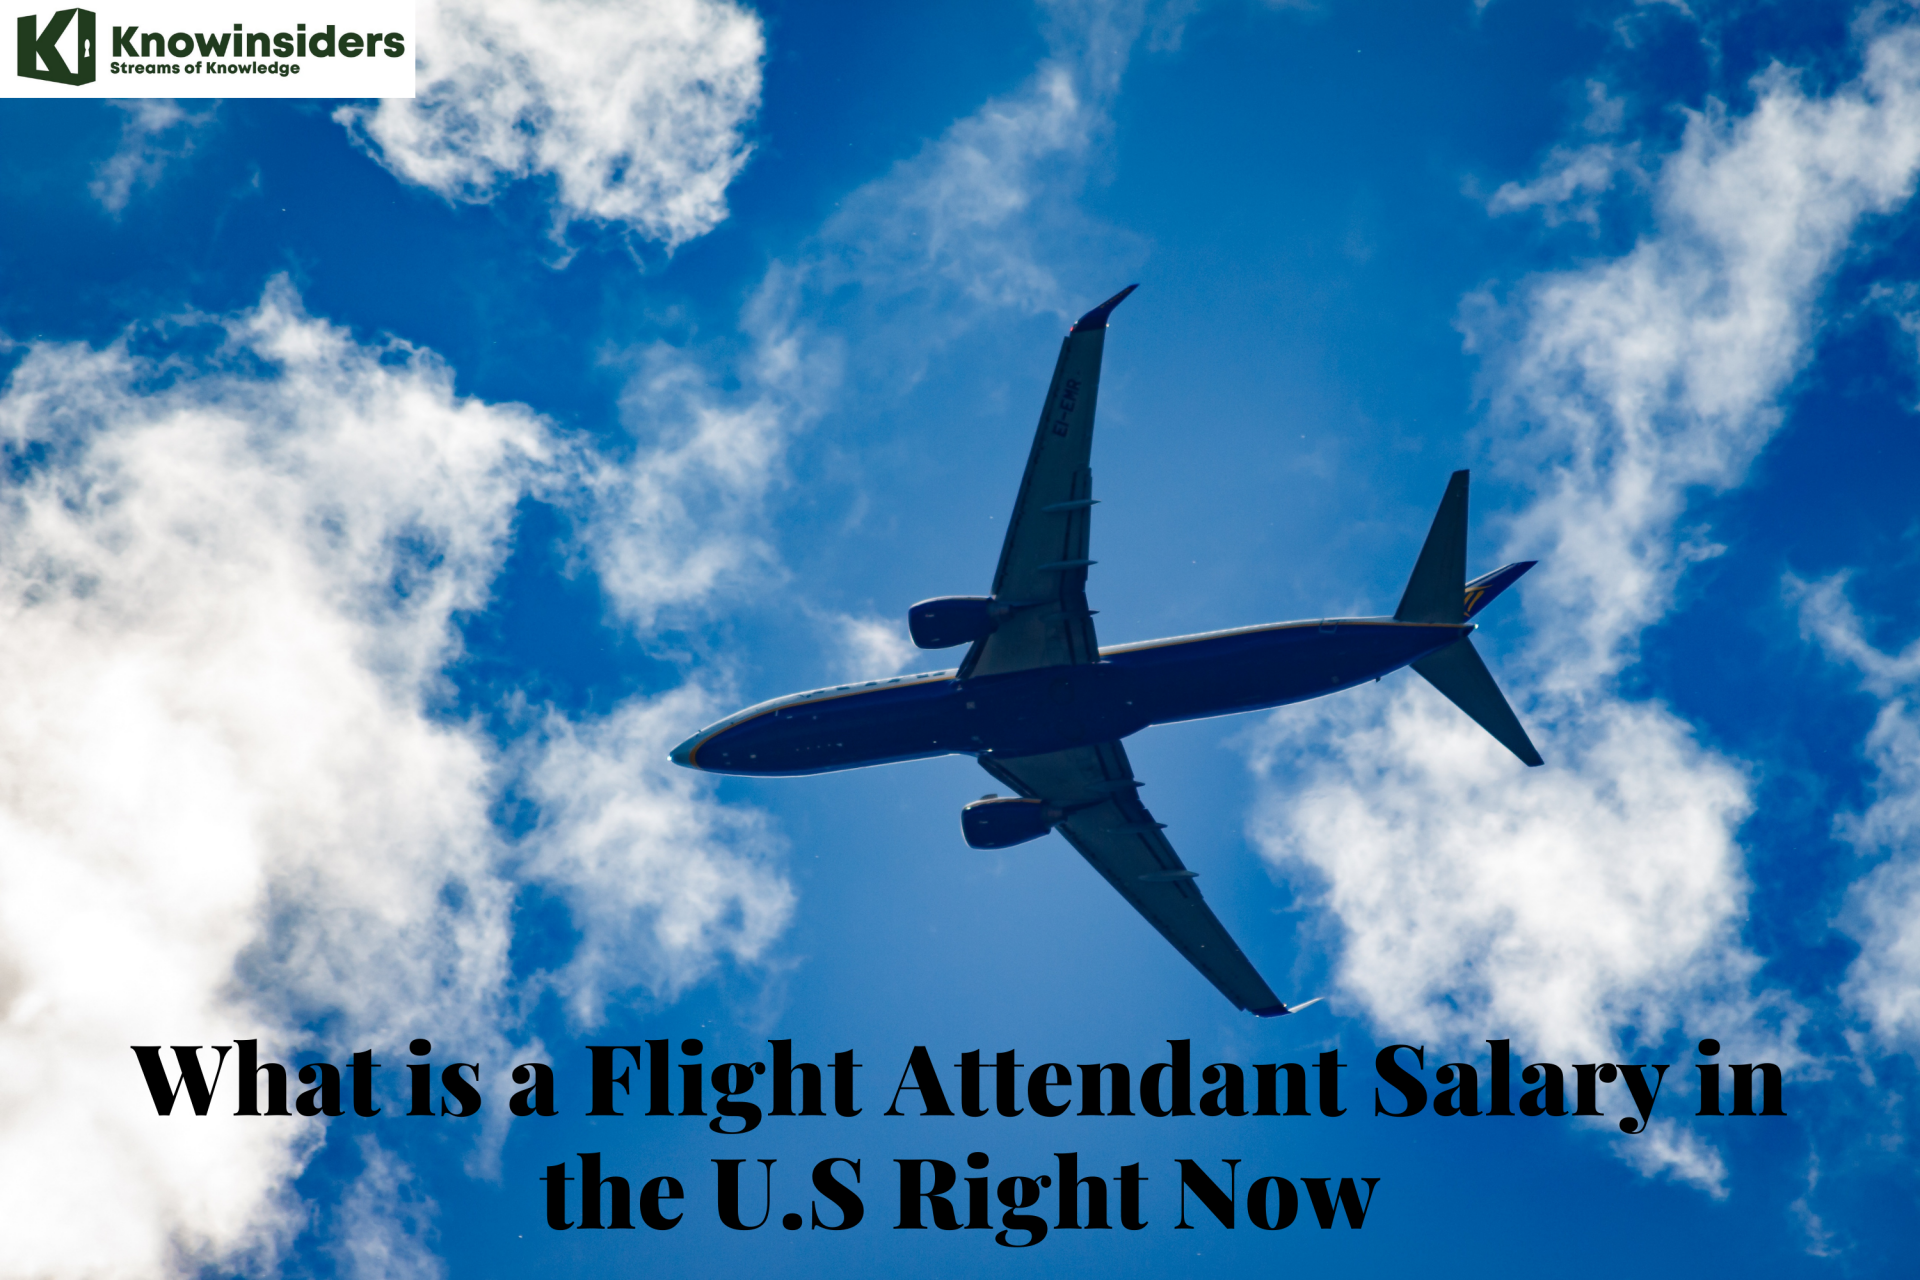 Facts About The Flight Attendant Salary in the U.S - Every State